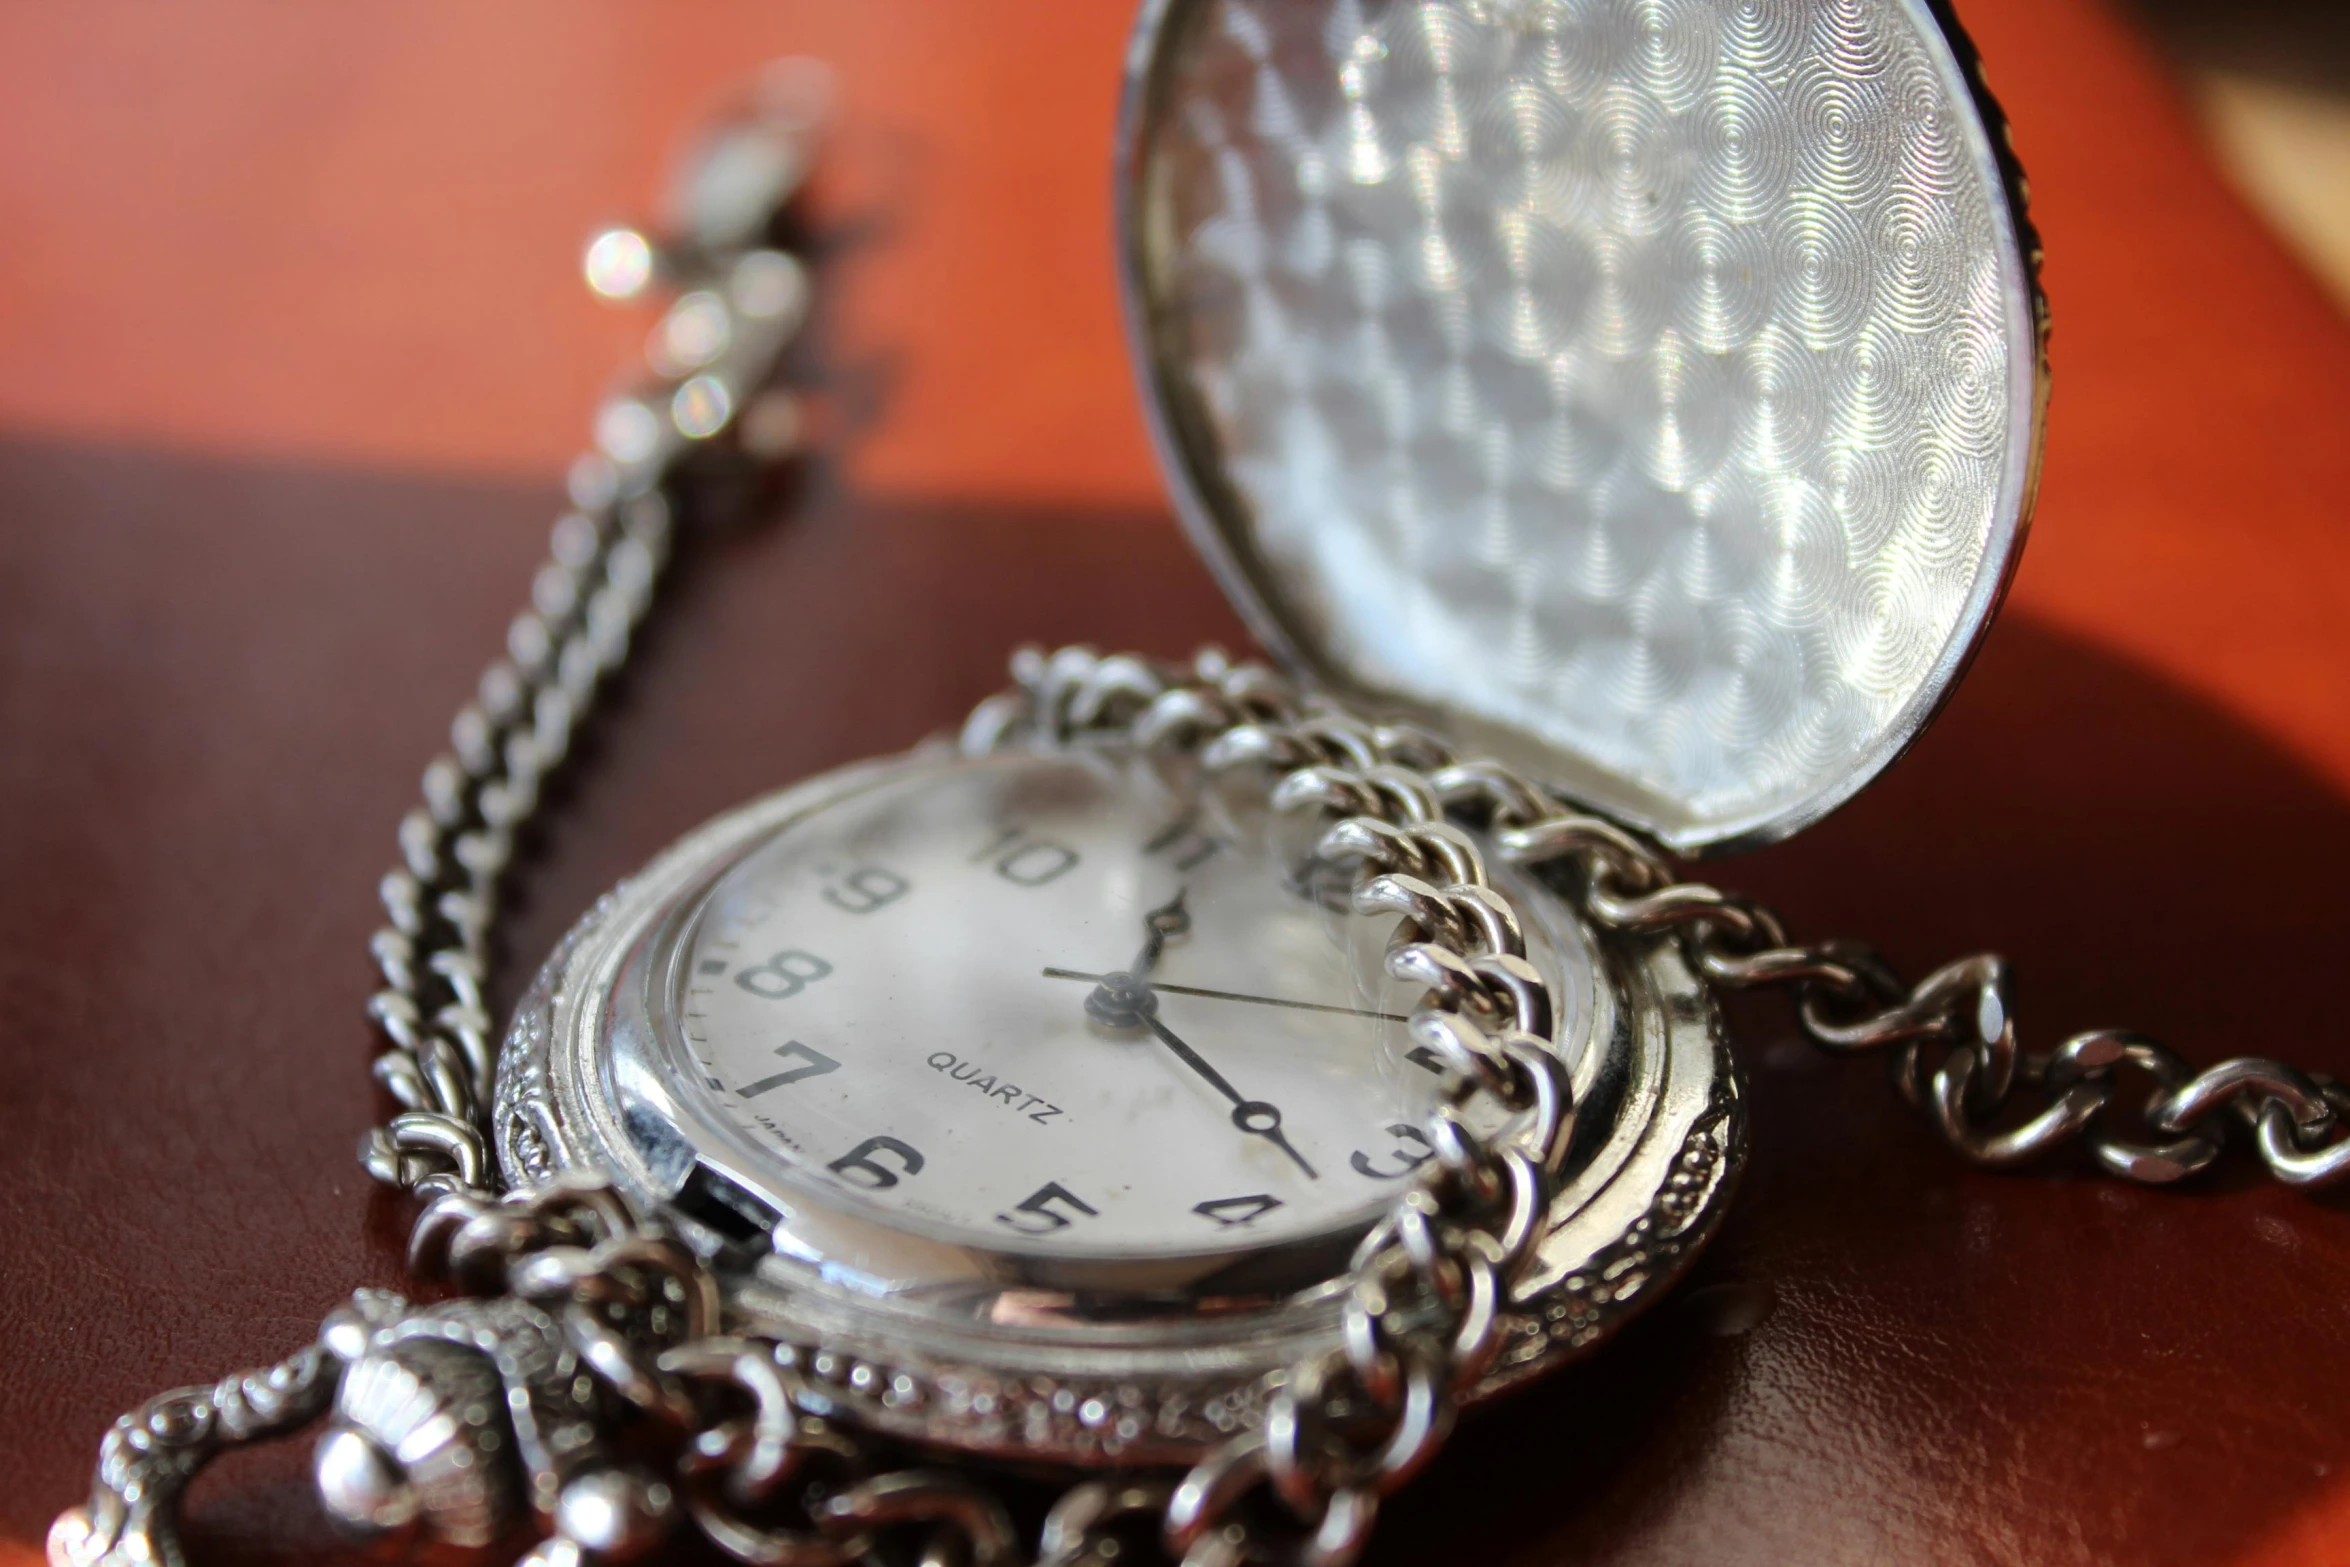 a close up of a pocket watch on a table, an album cover, shiny silver, thumbnail, detailed jewellery, chain mail